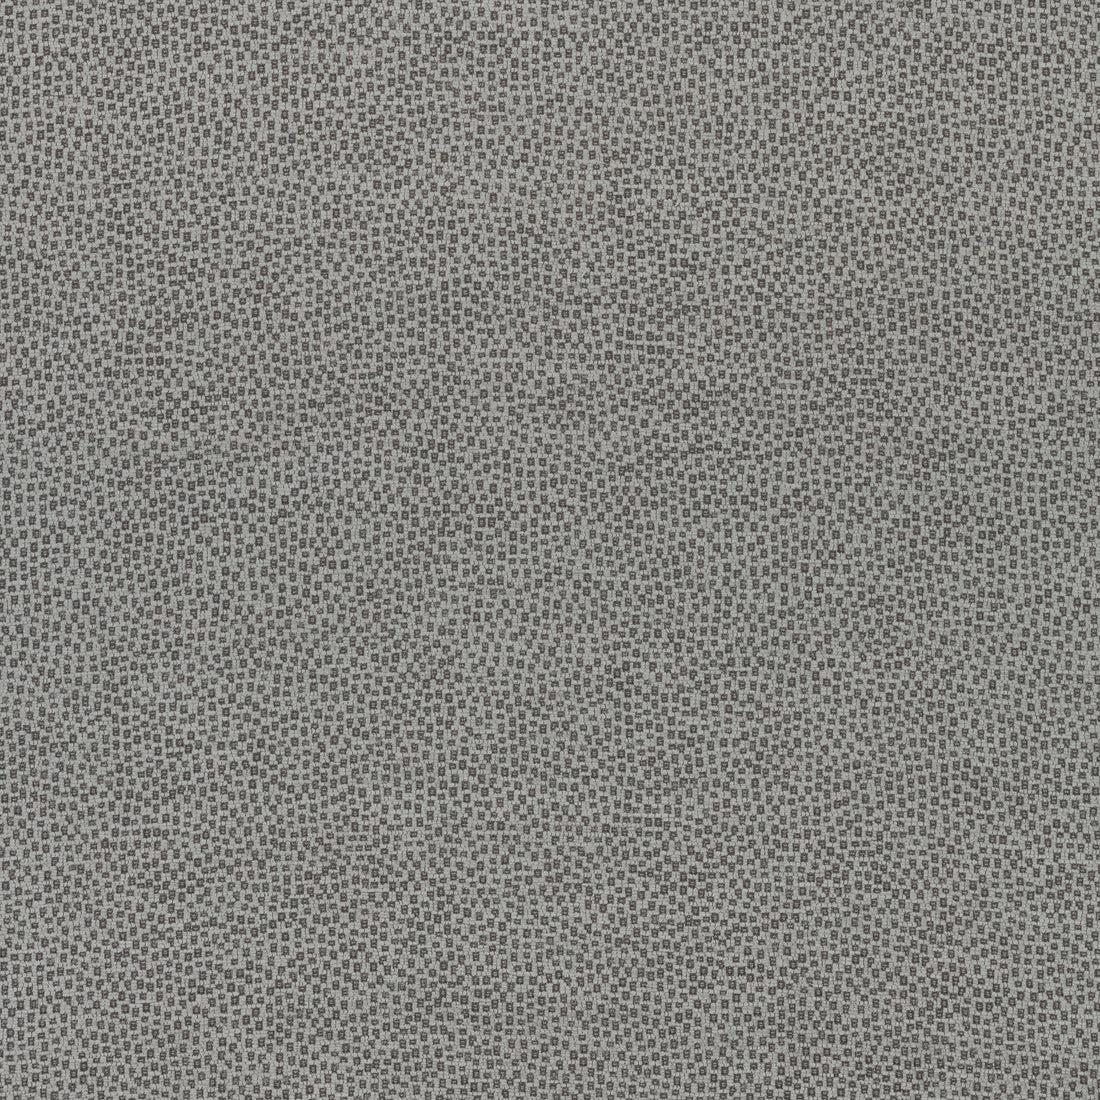 Nala fabric in charcoal color - pattern number W74081 - by Thibaut in the Cadence collection